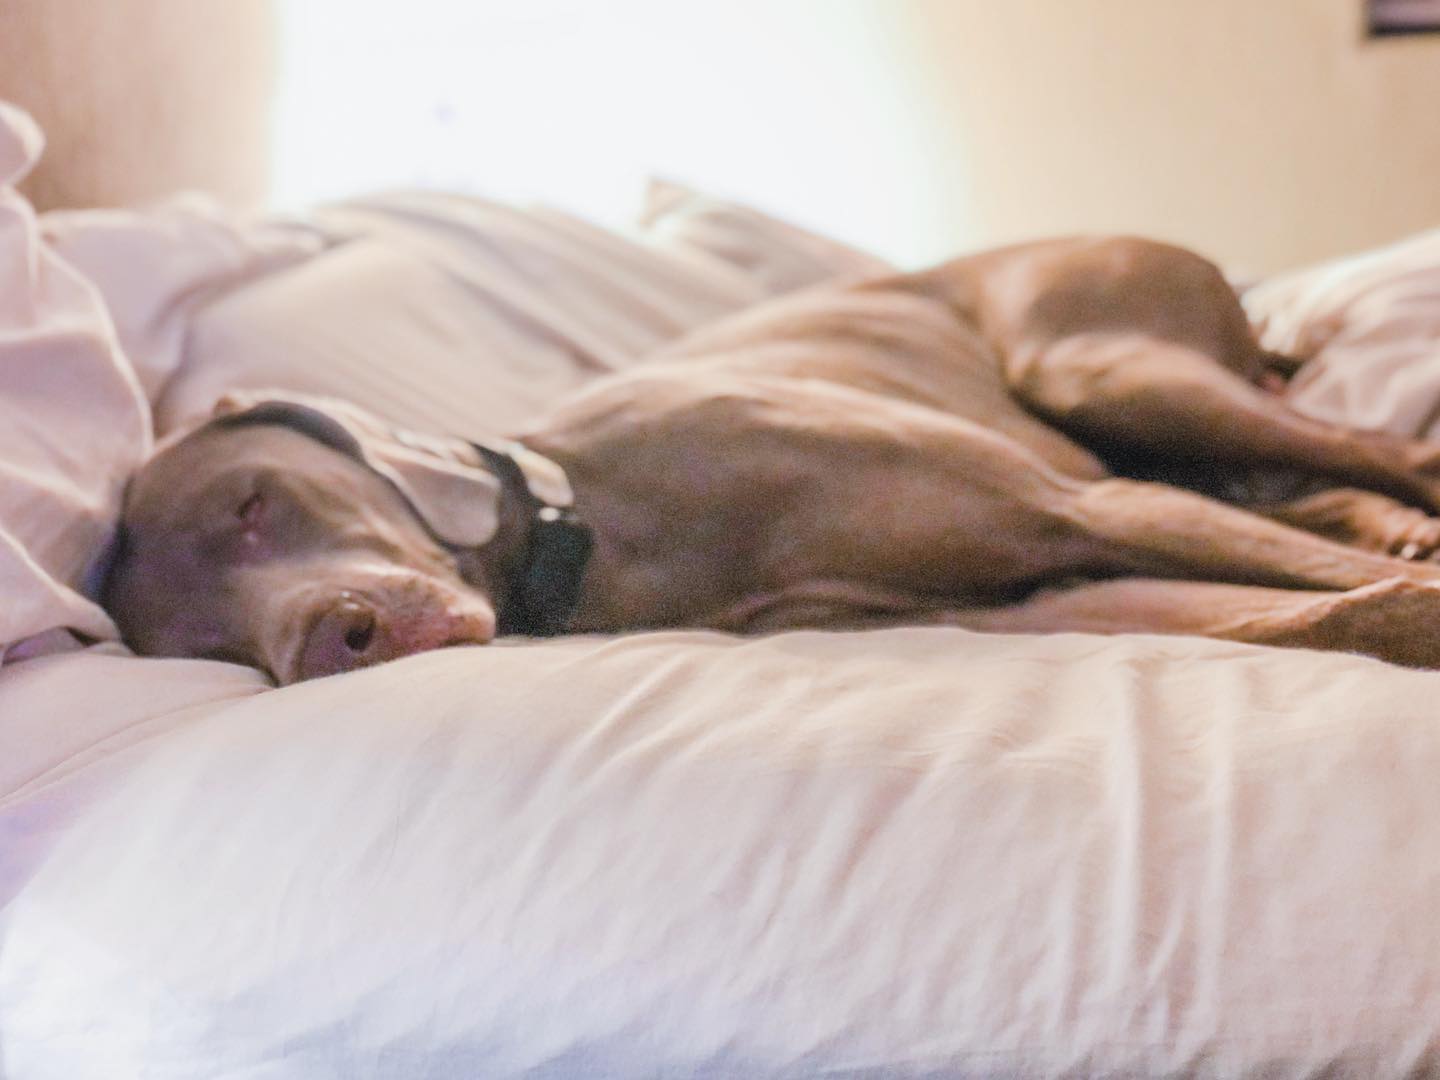 On a scale of 1 to Spoiled, how spoiled is Sterling at bedtime? #iruinedhim #hisbednotmine #weimaranersofinstagram #spoileddog #livinghisbestlife [instagram]